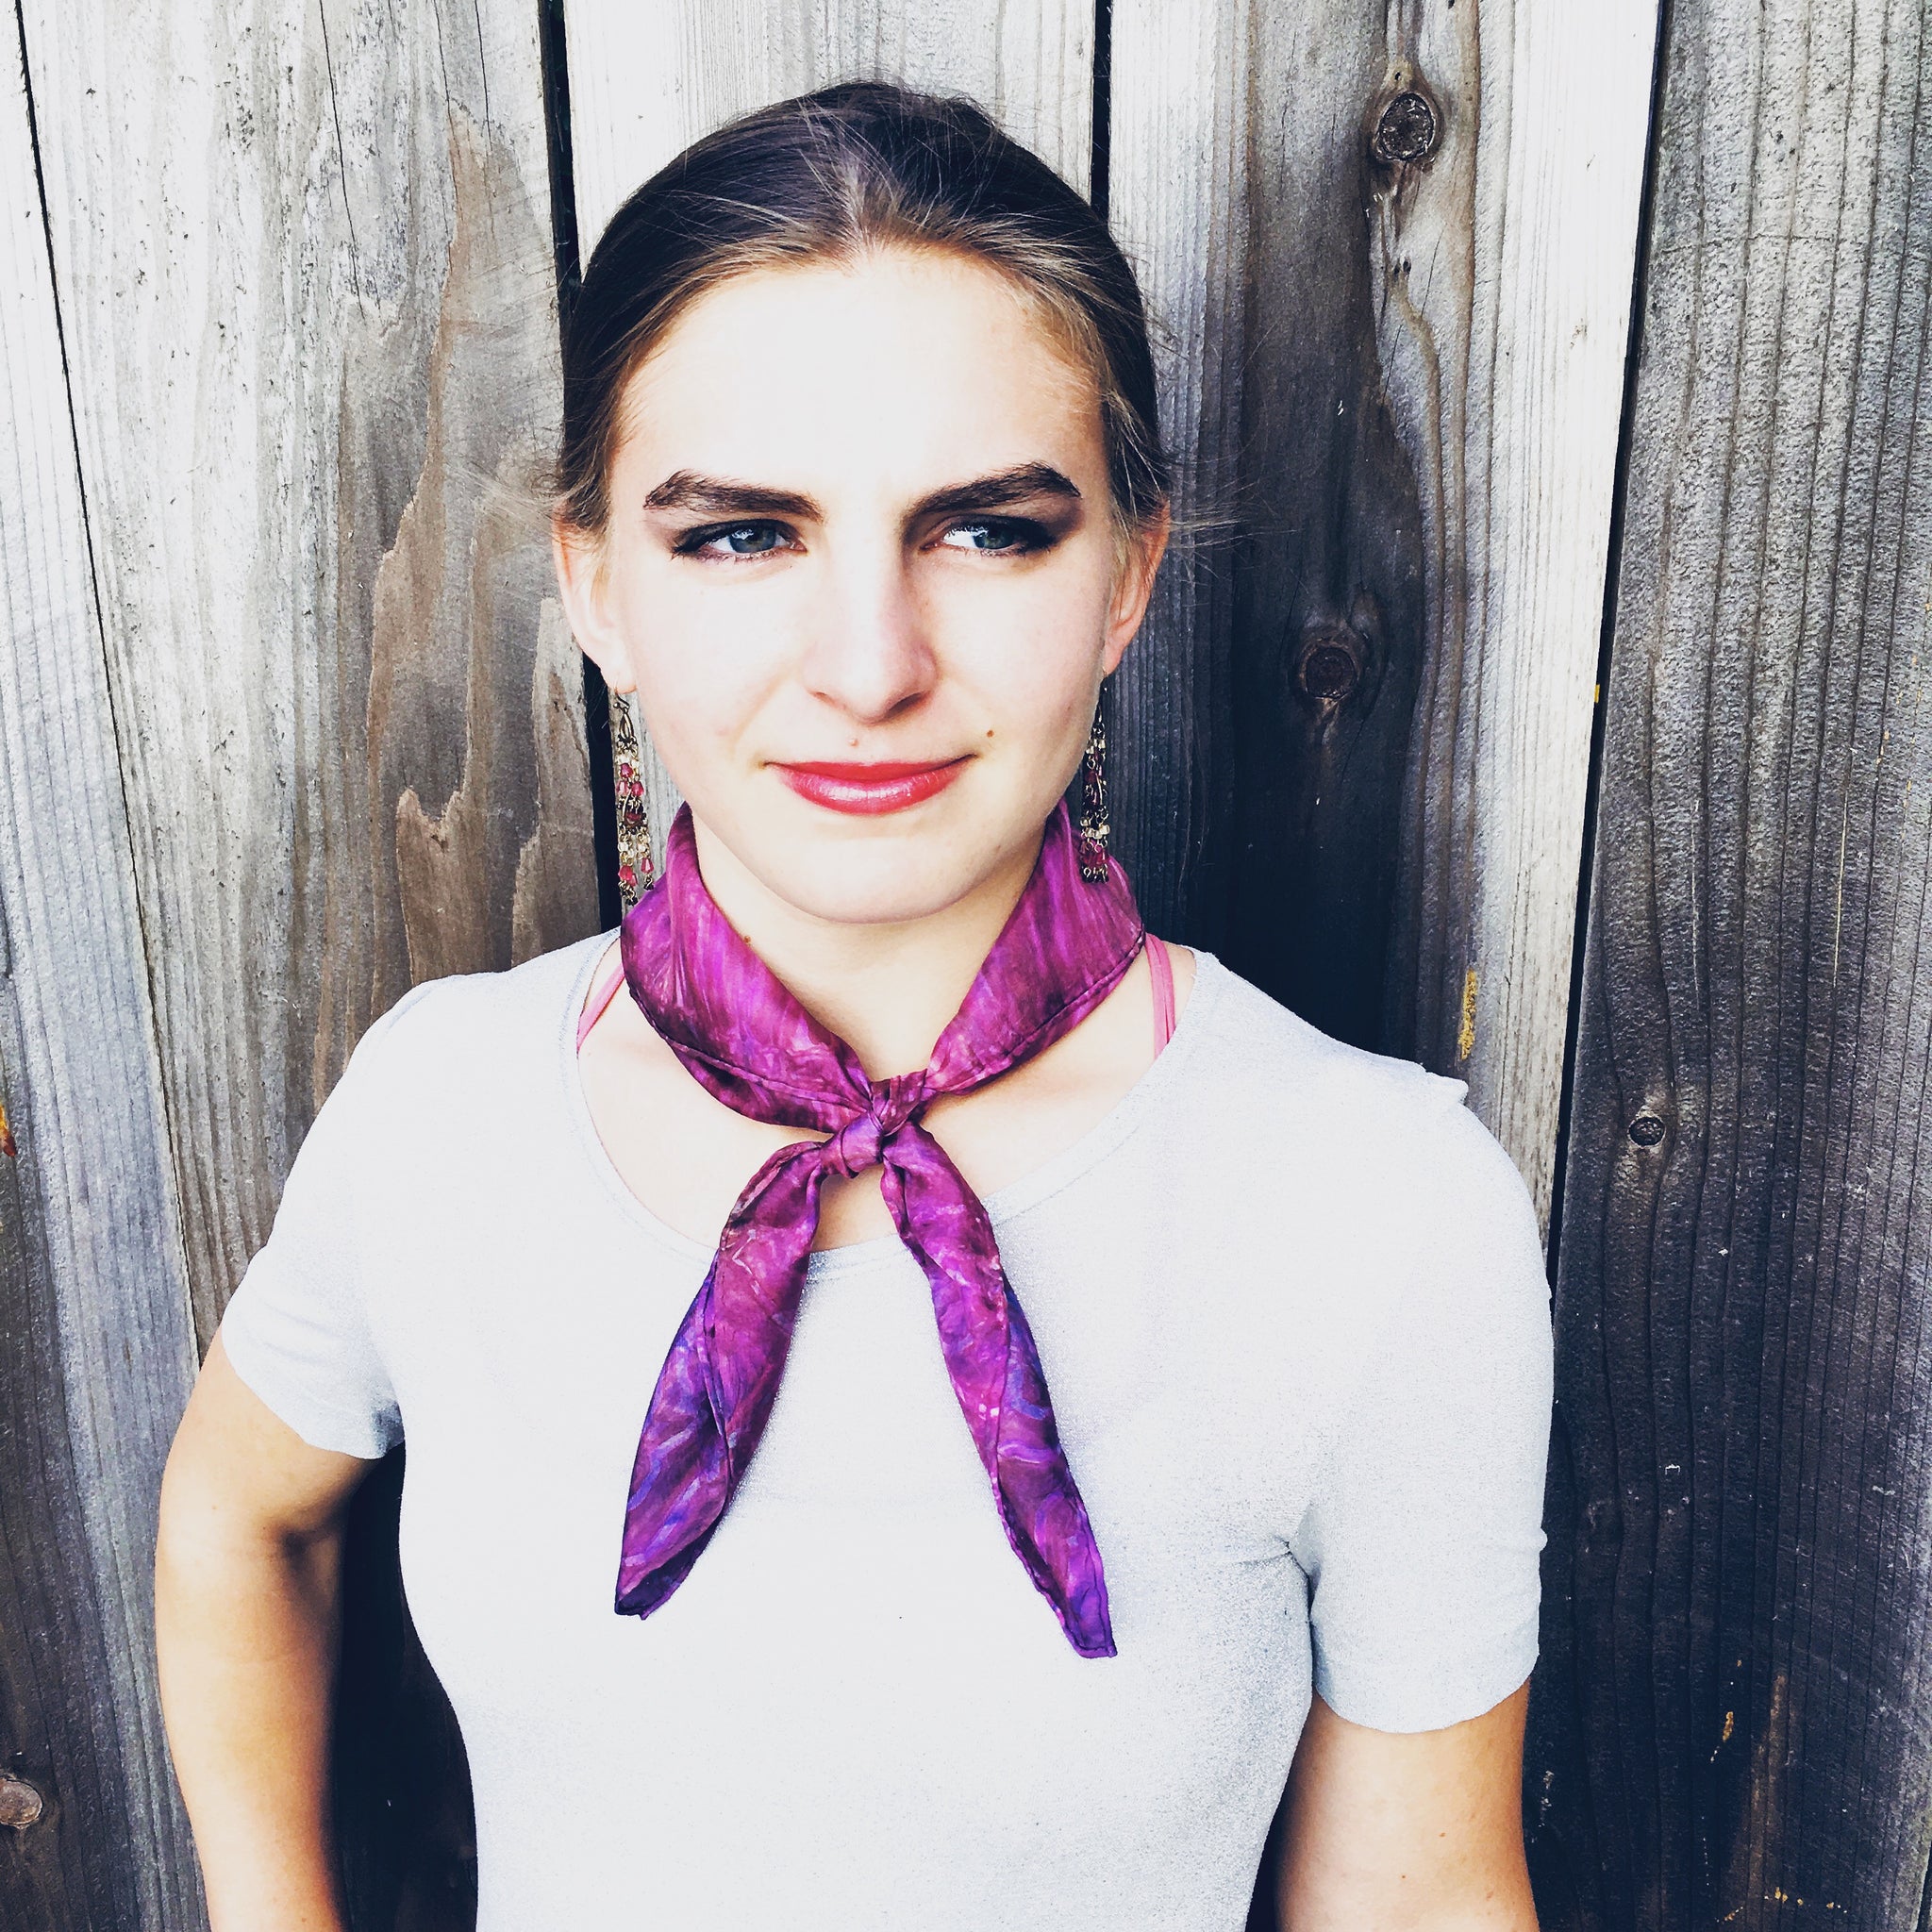 Model is wearing hot pink fuchsia luxury silk bandana scarf tied in front around neck, sustainable wear. Square dimension 21 inches by 21 inches. Best fashion accessory for any season or occasion, and makes a great gift. Handmade artisan one of a kind accessory.